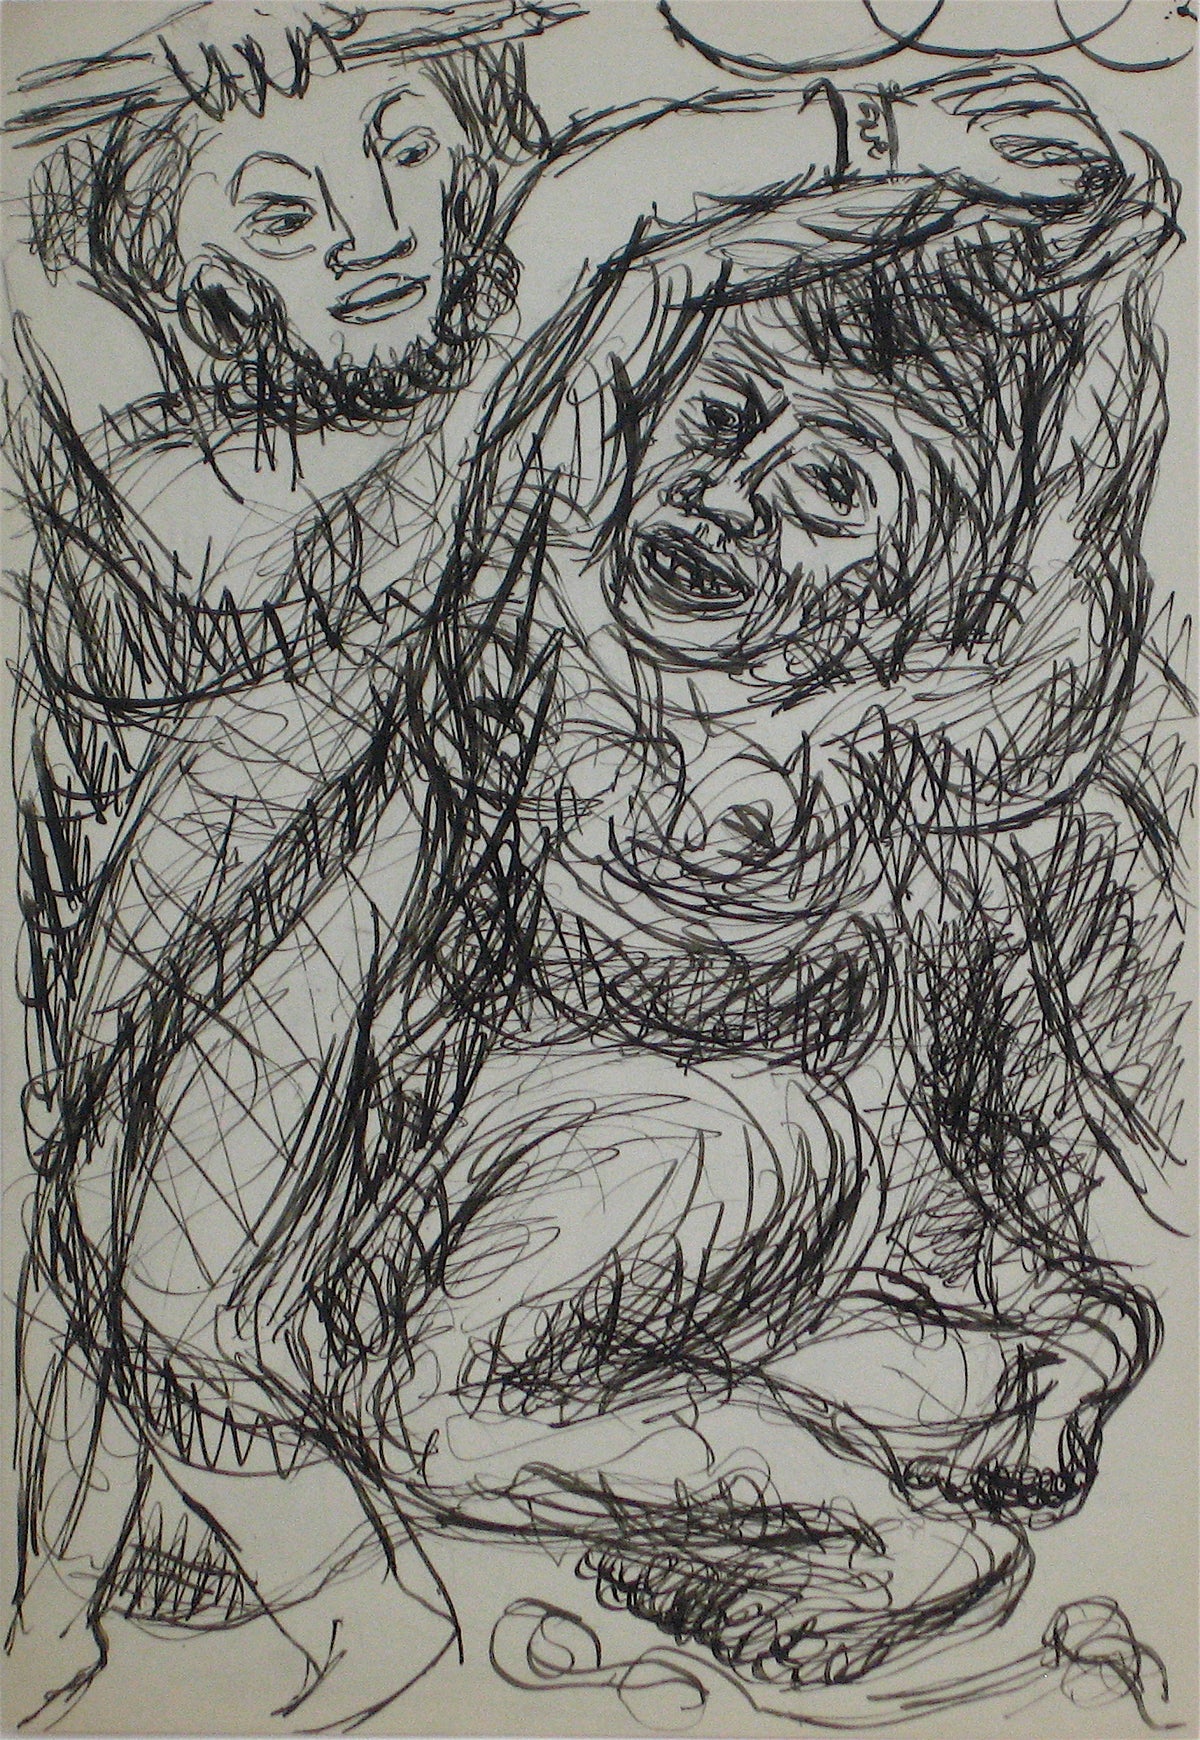 Abstract of Two Figures &lt;br&gt;Early 20th Century Ink&lt;br&gt;&lt;br&gt;#11328